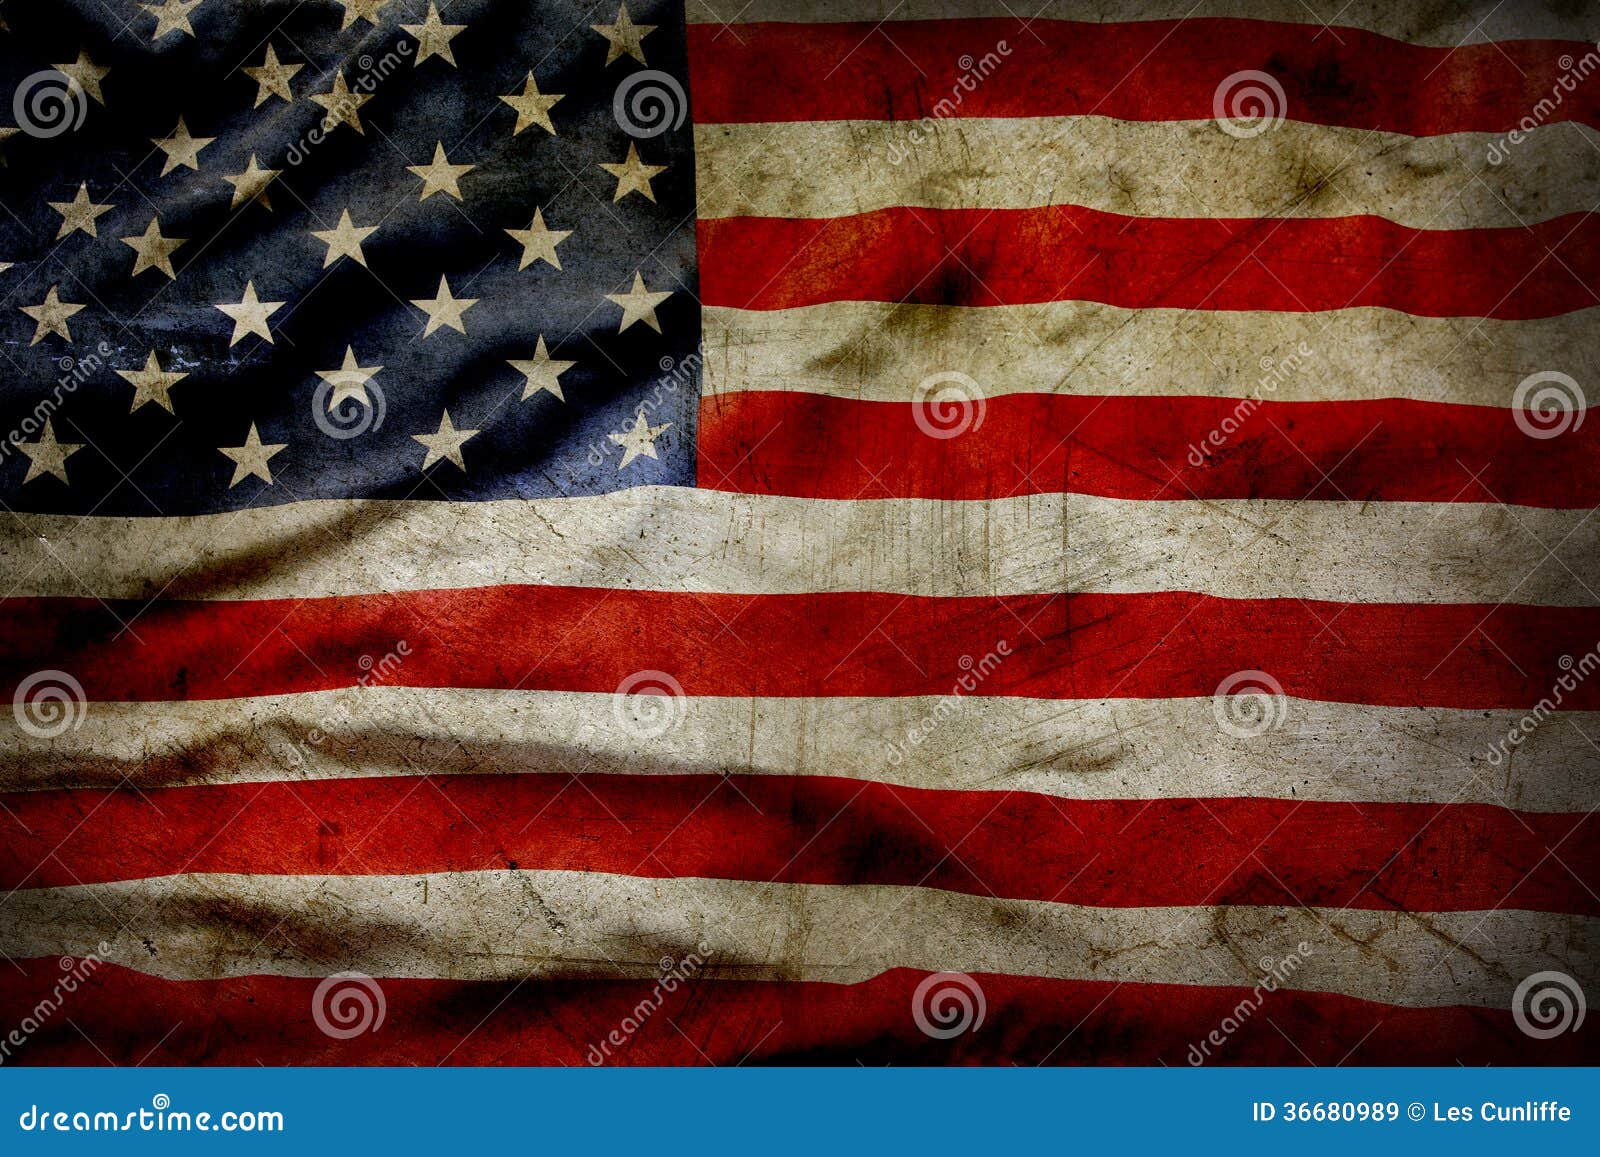 American Flag Royalty Free Stock Images Image 36680989